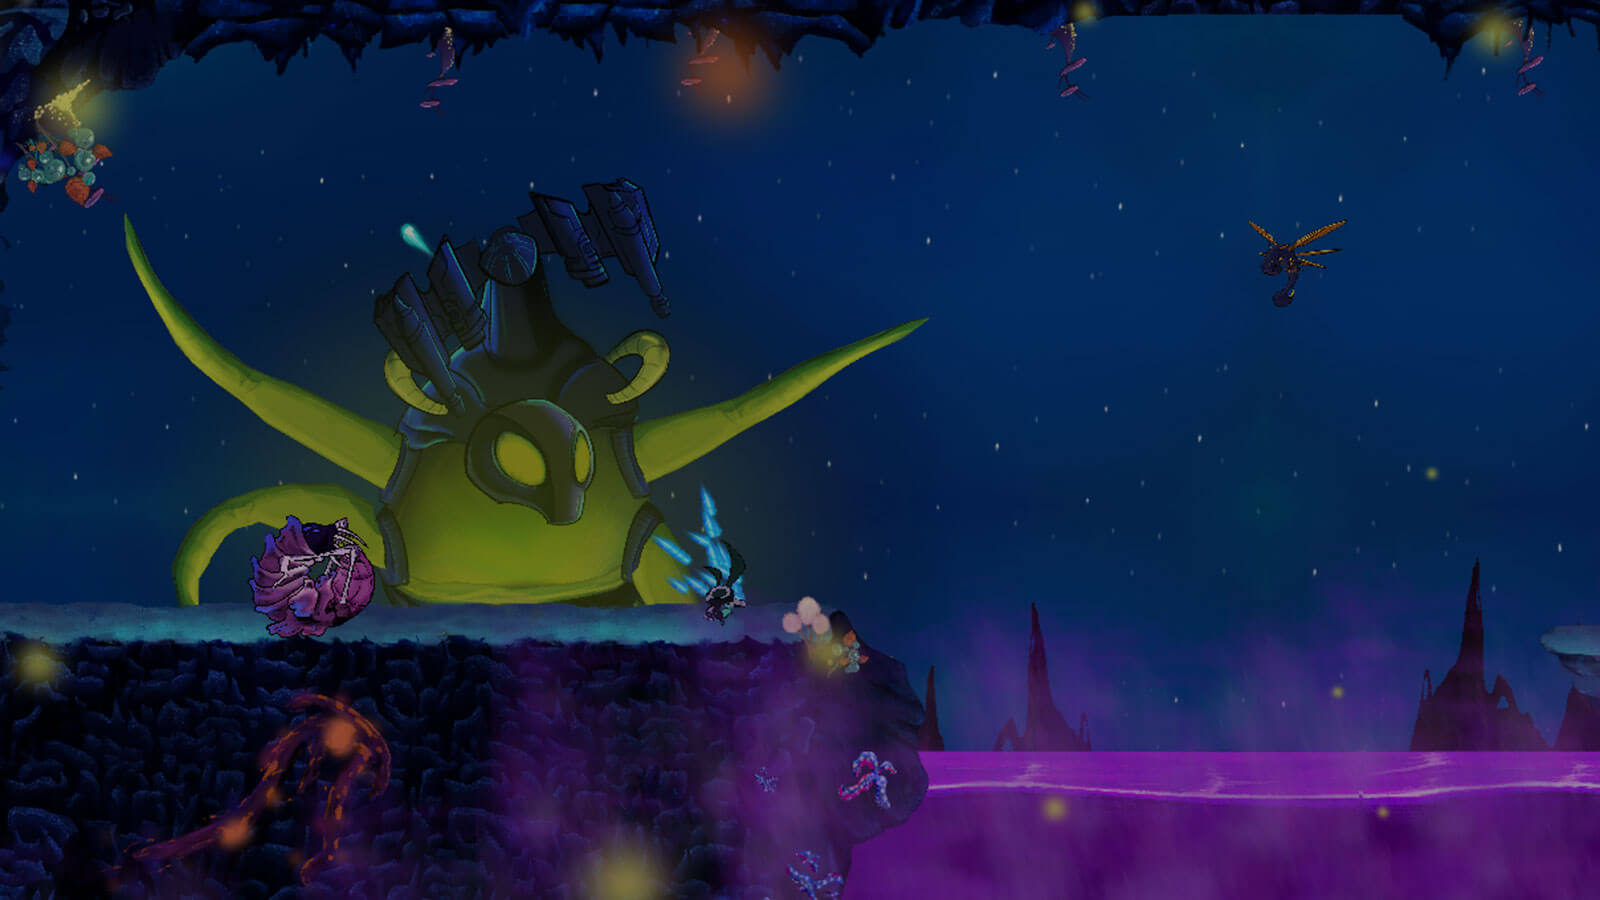 Player fires at multiple enemies atop a rocky platform.